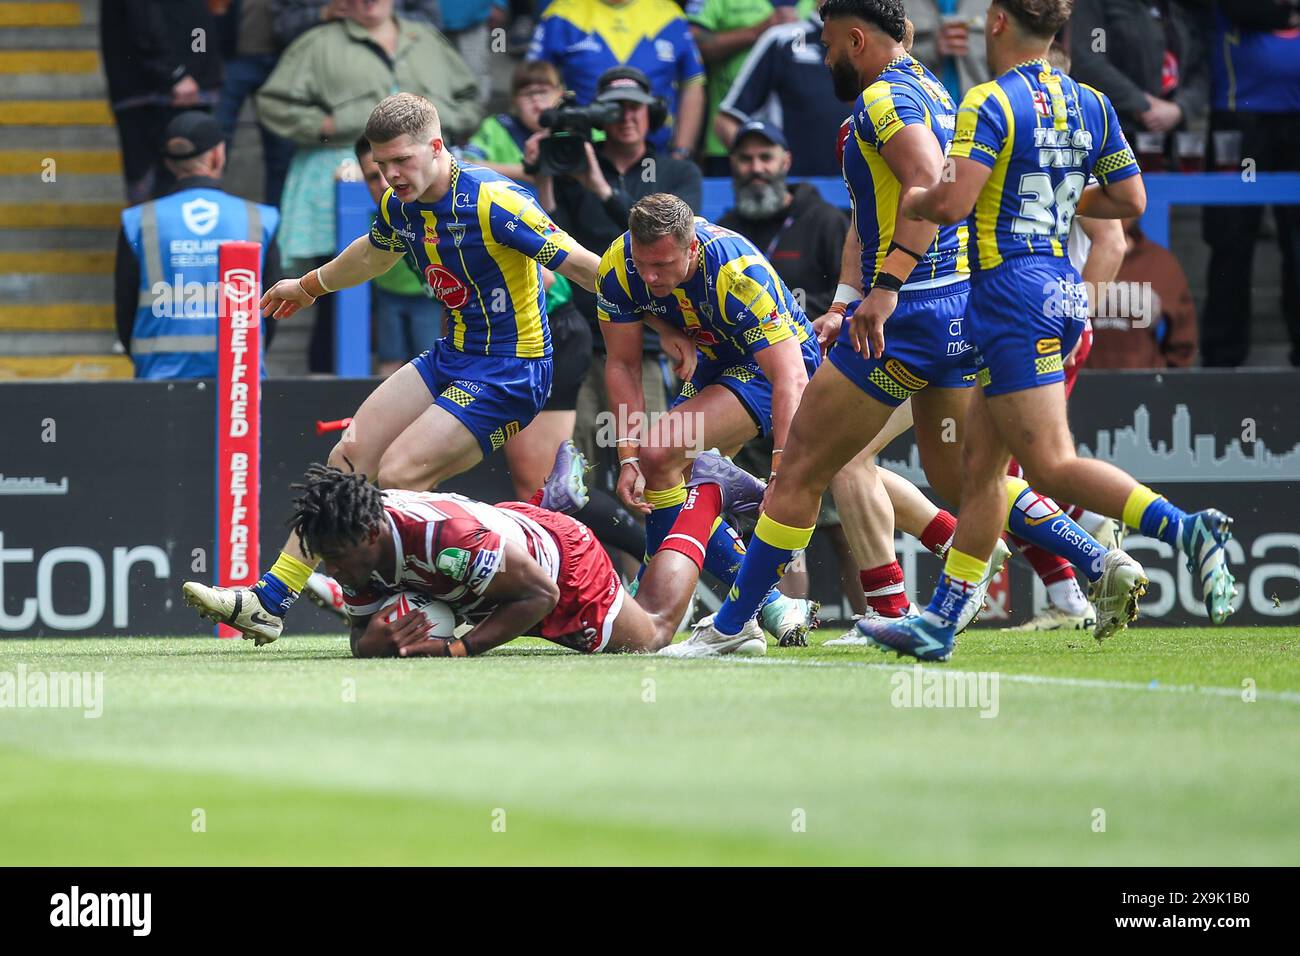 Junior Nsemba of Wigan Warriors goes over for a try and makes the score 12-4 during the Betfred Super League Round 13 match Warrington Wolves vs Wigan Warriors at Halliwell Jones Stadium, Warrington, United Kingdom, 1st June 2024  (Photo by Gareth Evans/News Images) in Warrington, United Kingdom on 6/1/2024. (Photo by Gareth Evans/News Images/Sipa USA) Stock Photo